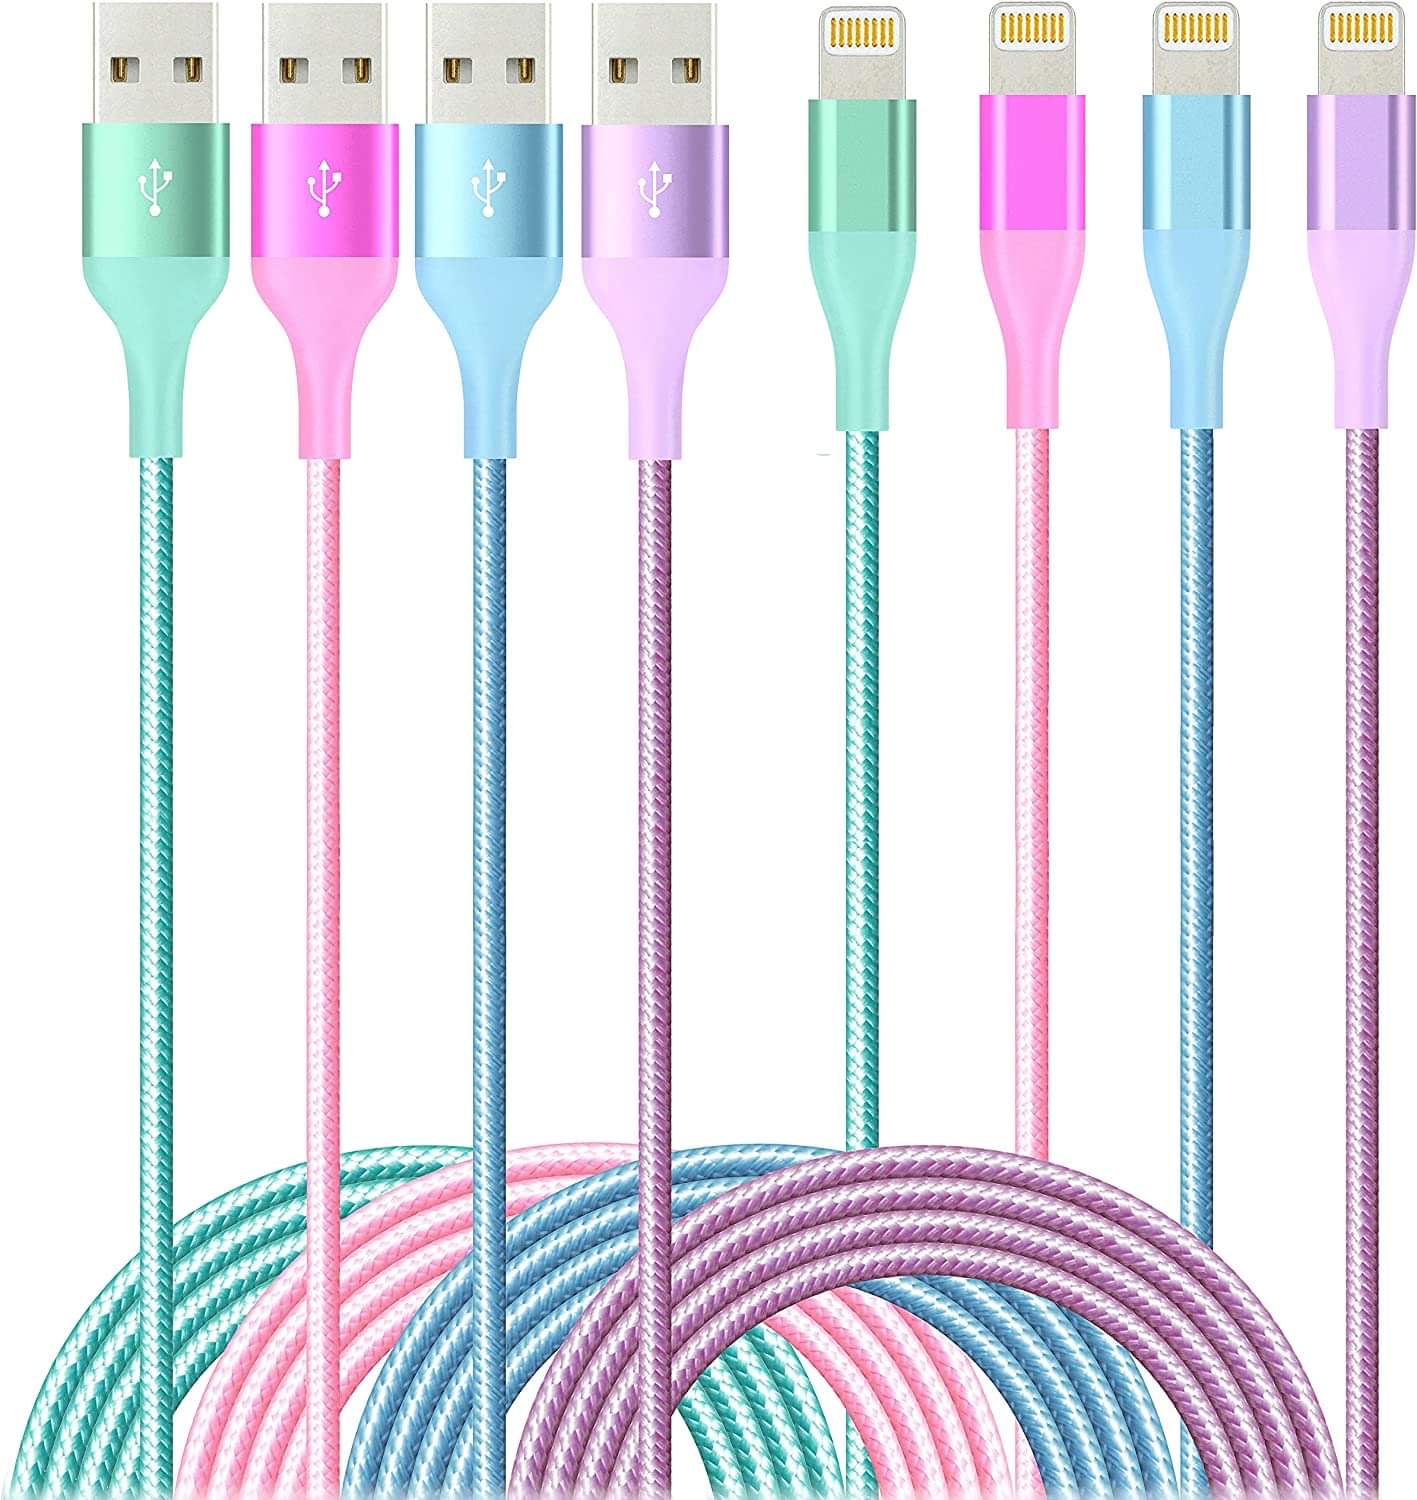 4Pack 6ft Lightning Cable iPhone Charger Apple MFi Certified $5.99 at Amazon